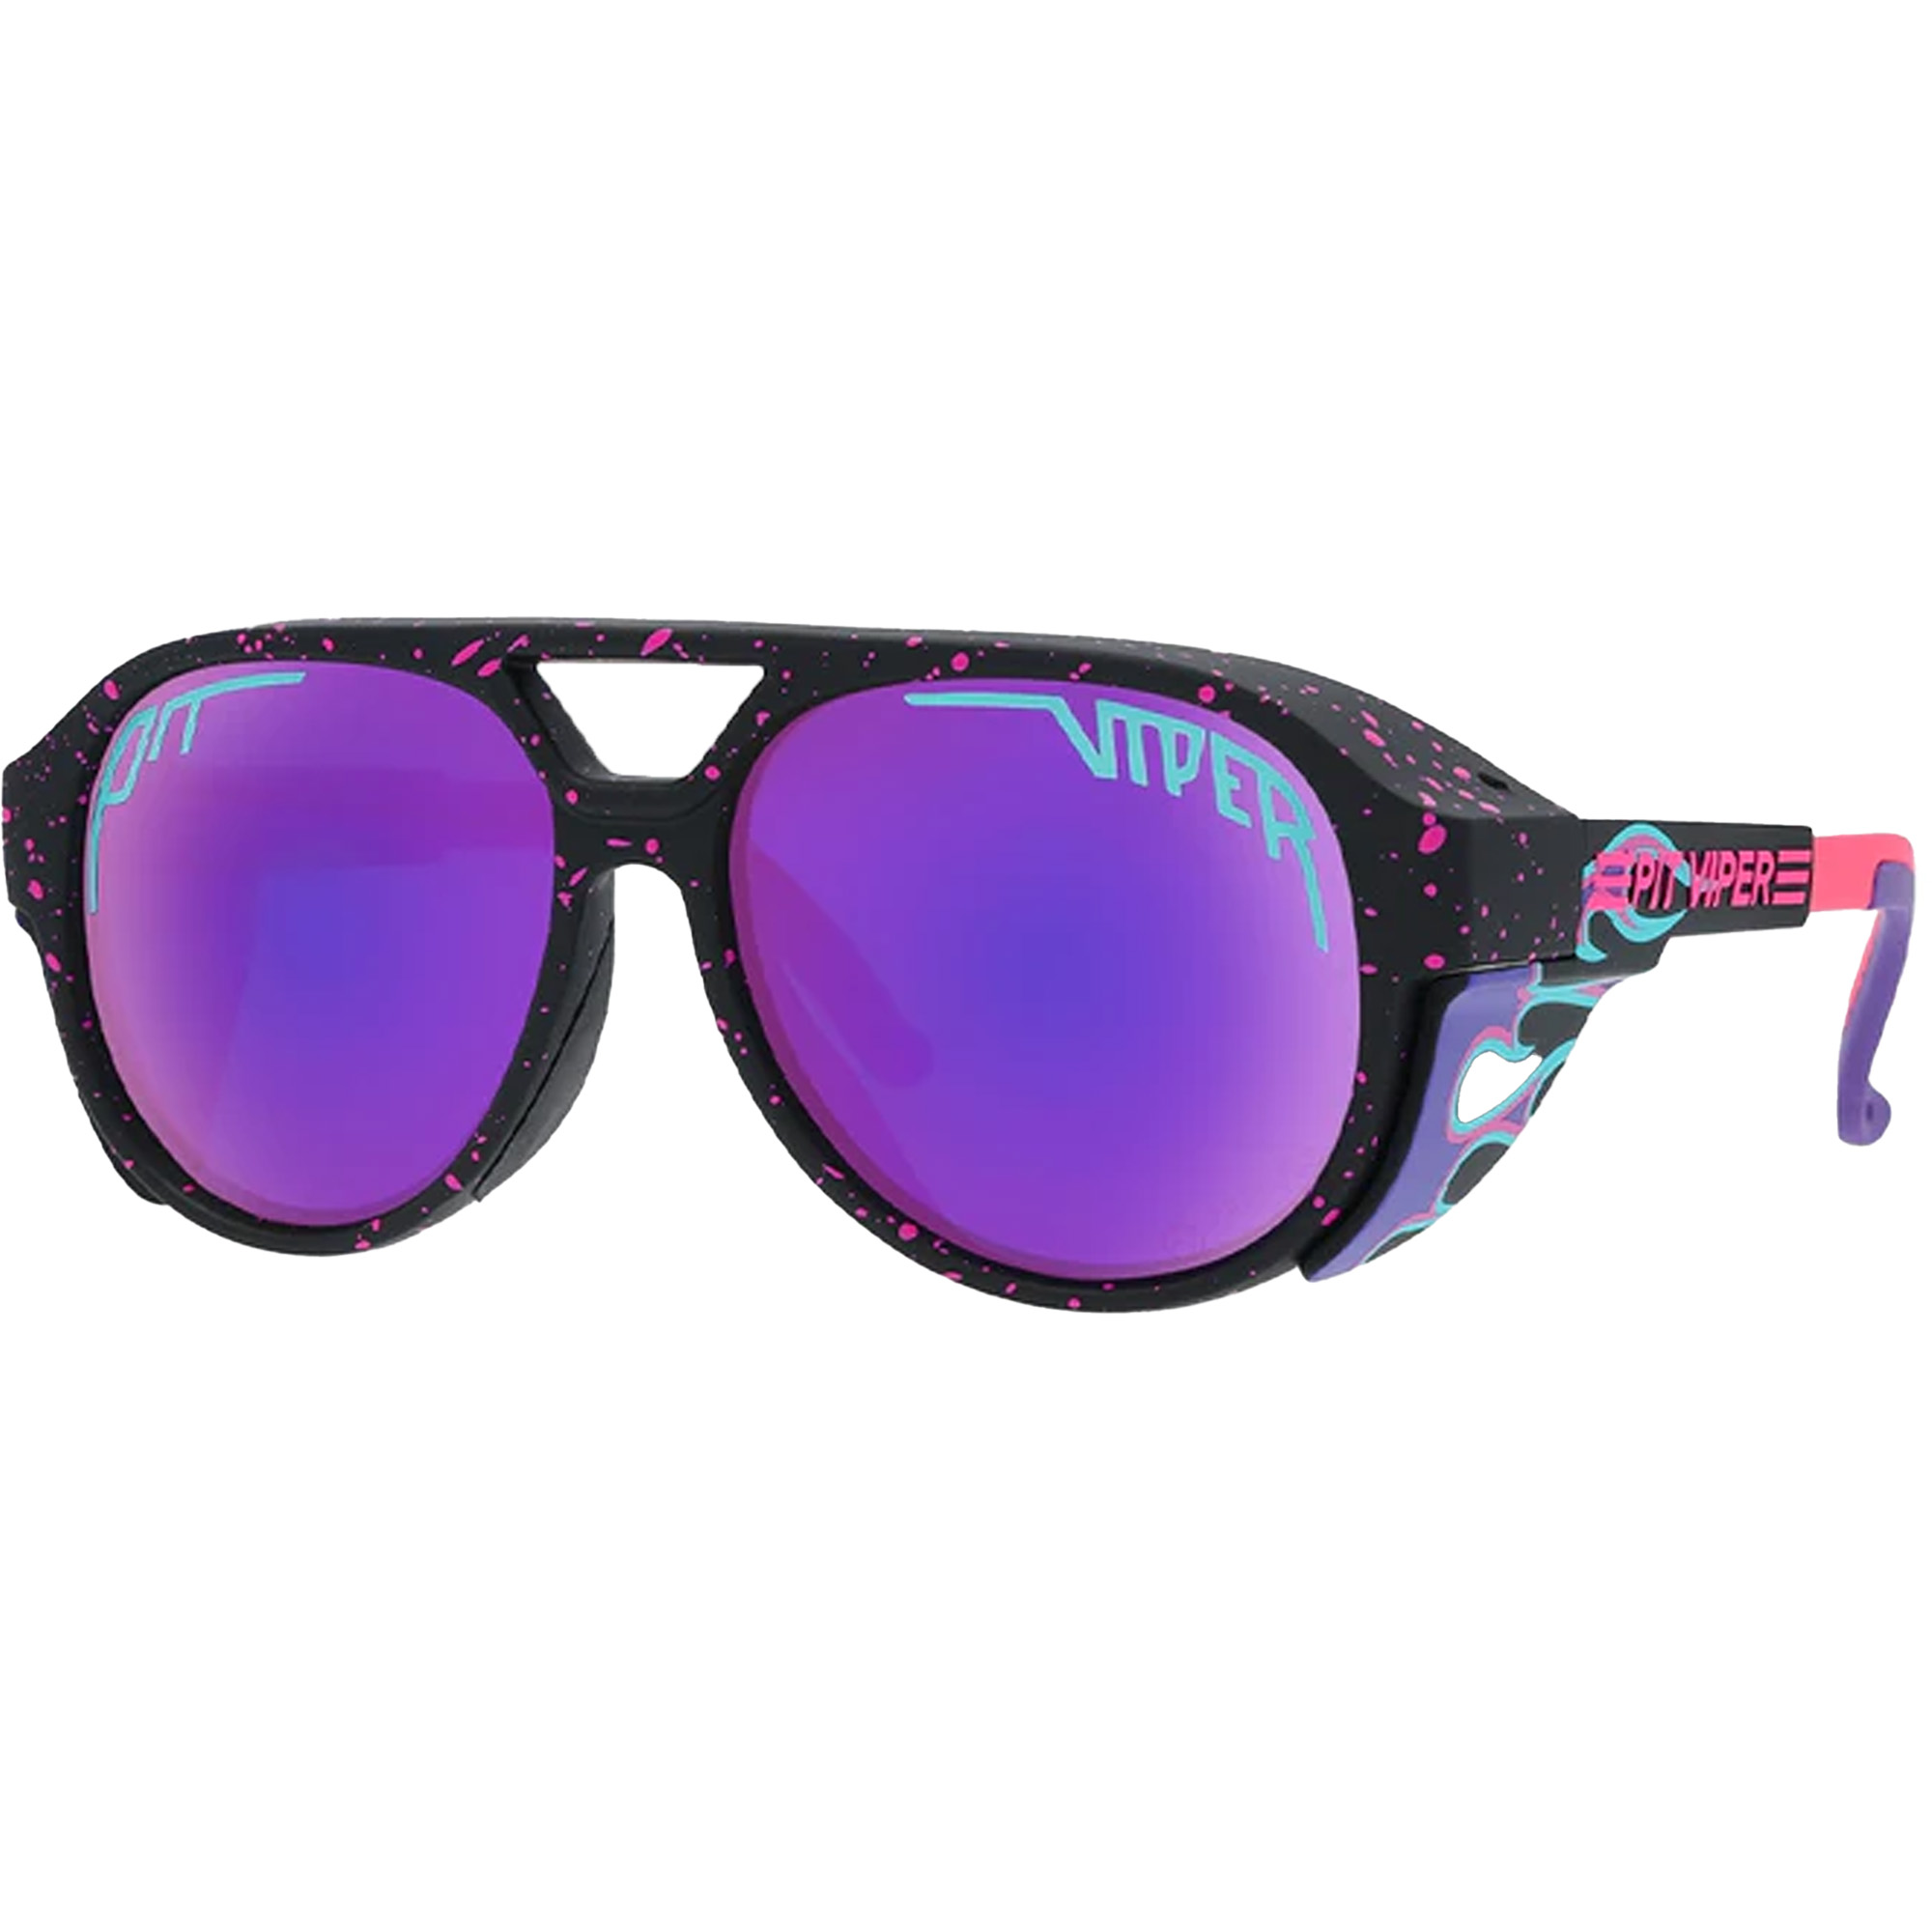 Pit Viper The Exciters Dual Lens Polarized Sunglasses